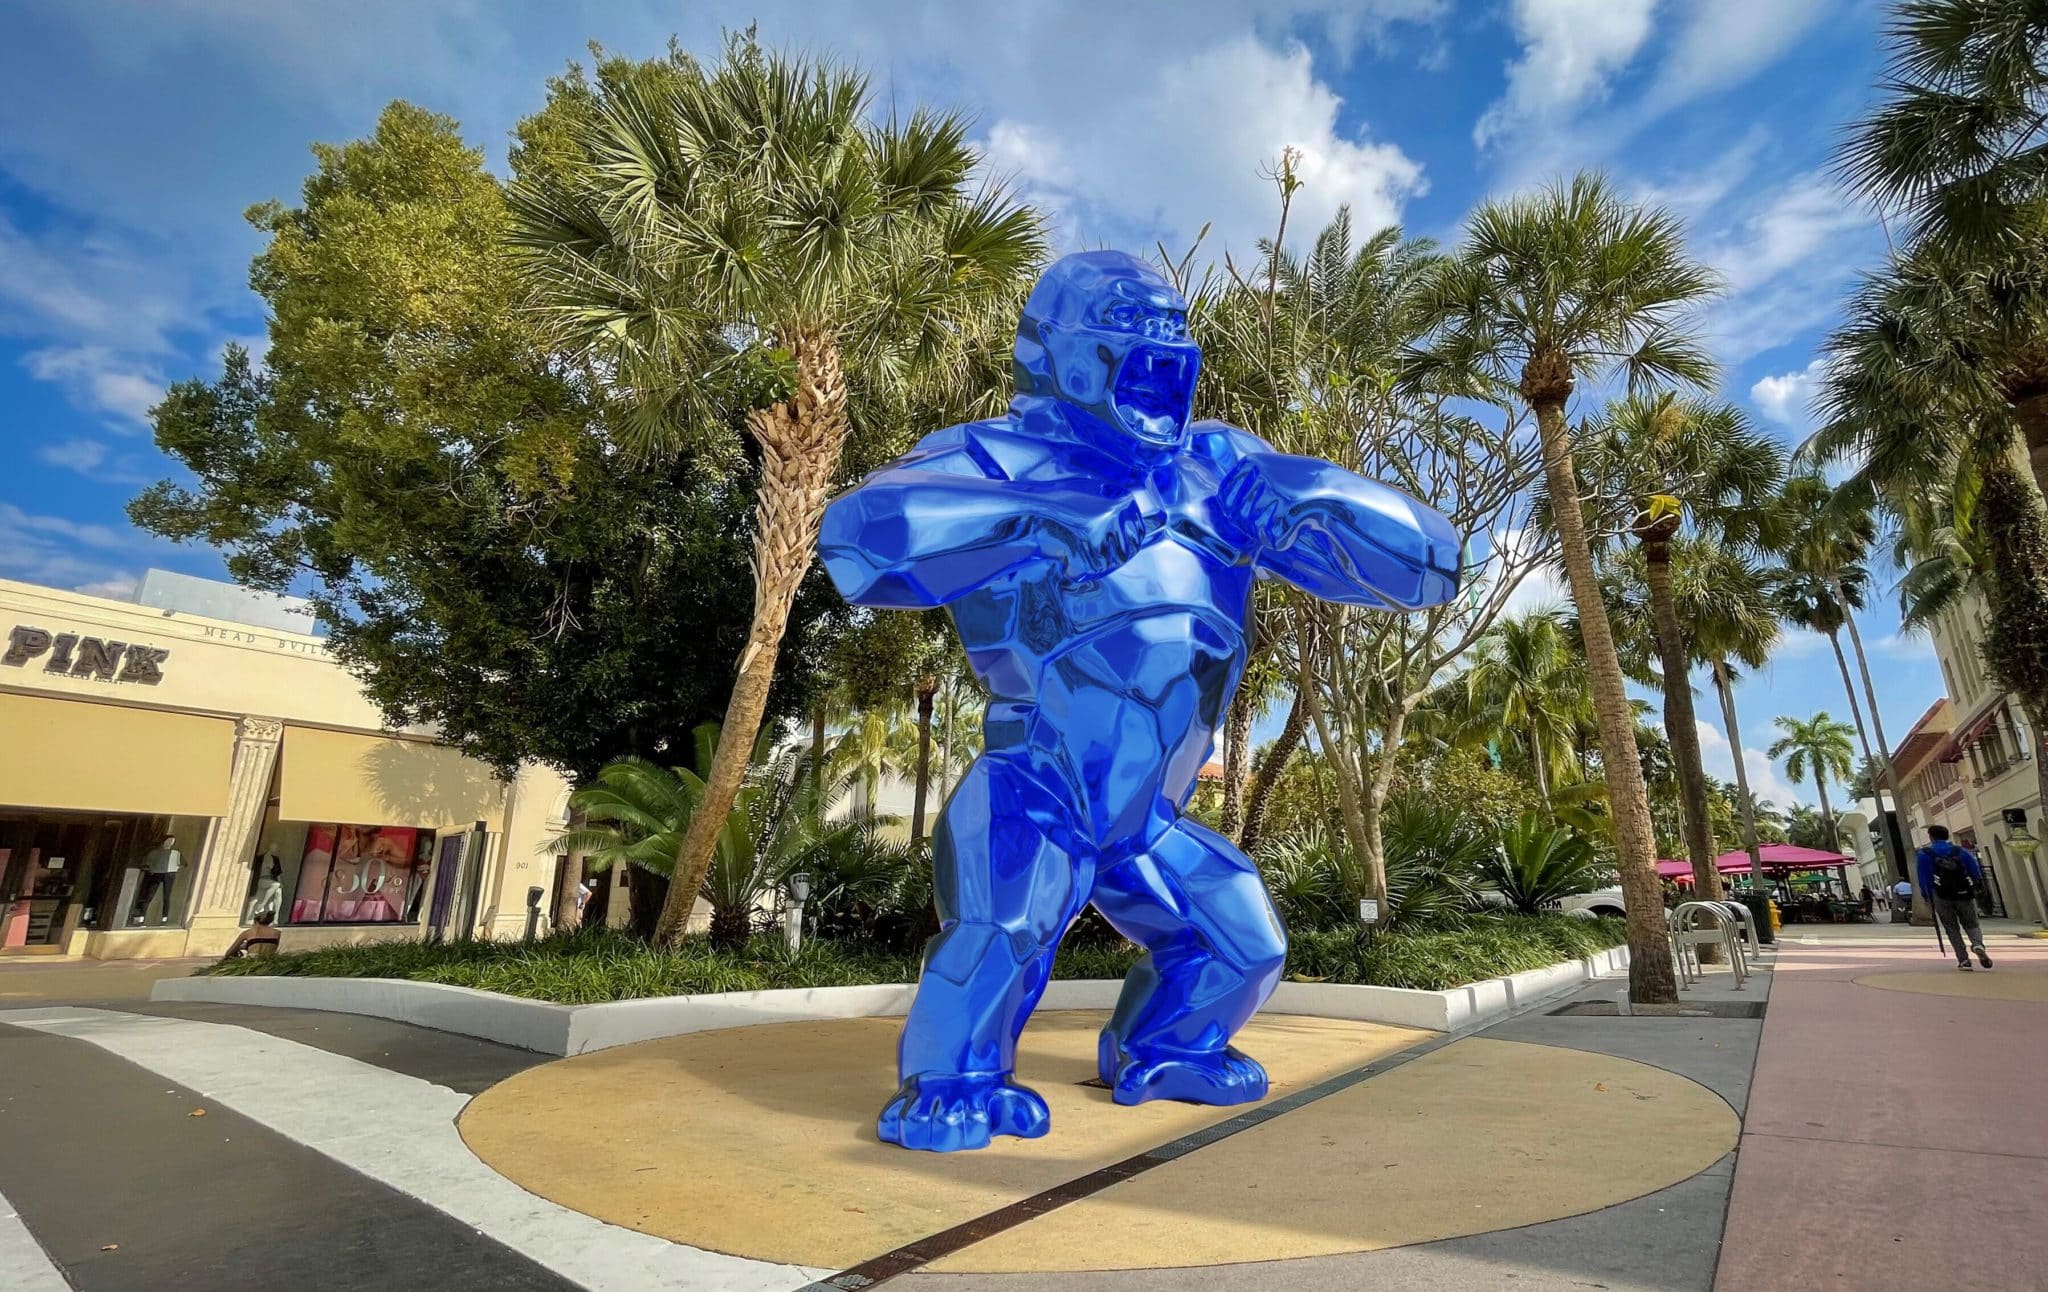 Wild Kong, a giant blue gorilla sculpture by Richard Orlinski, in the middle of Lincoln Road